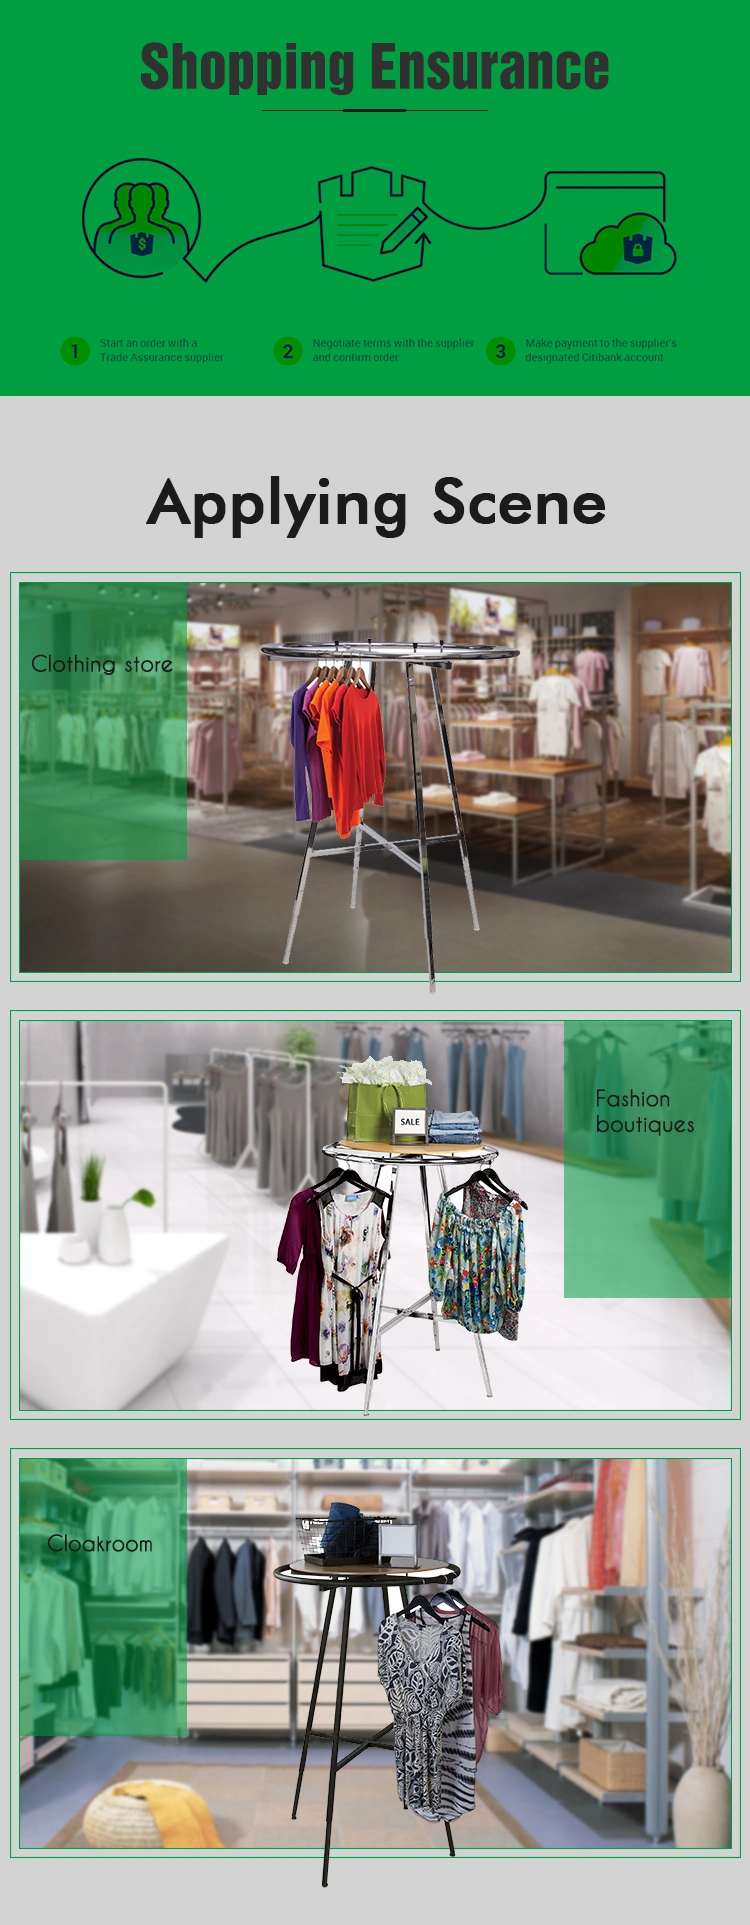 OEM Service Round Design Store Clothing Display Garment Rack / Drying Rack for Hanging Items